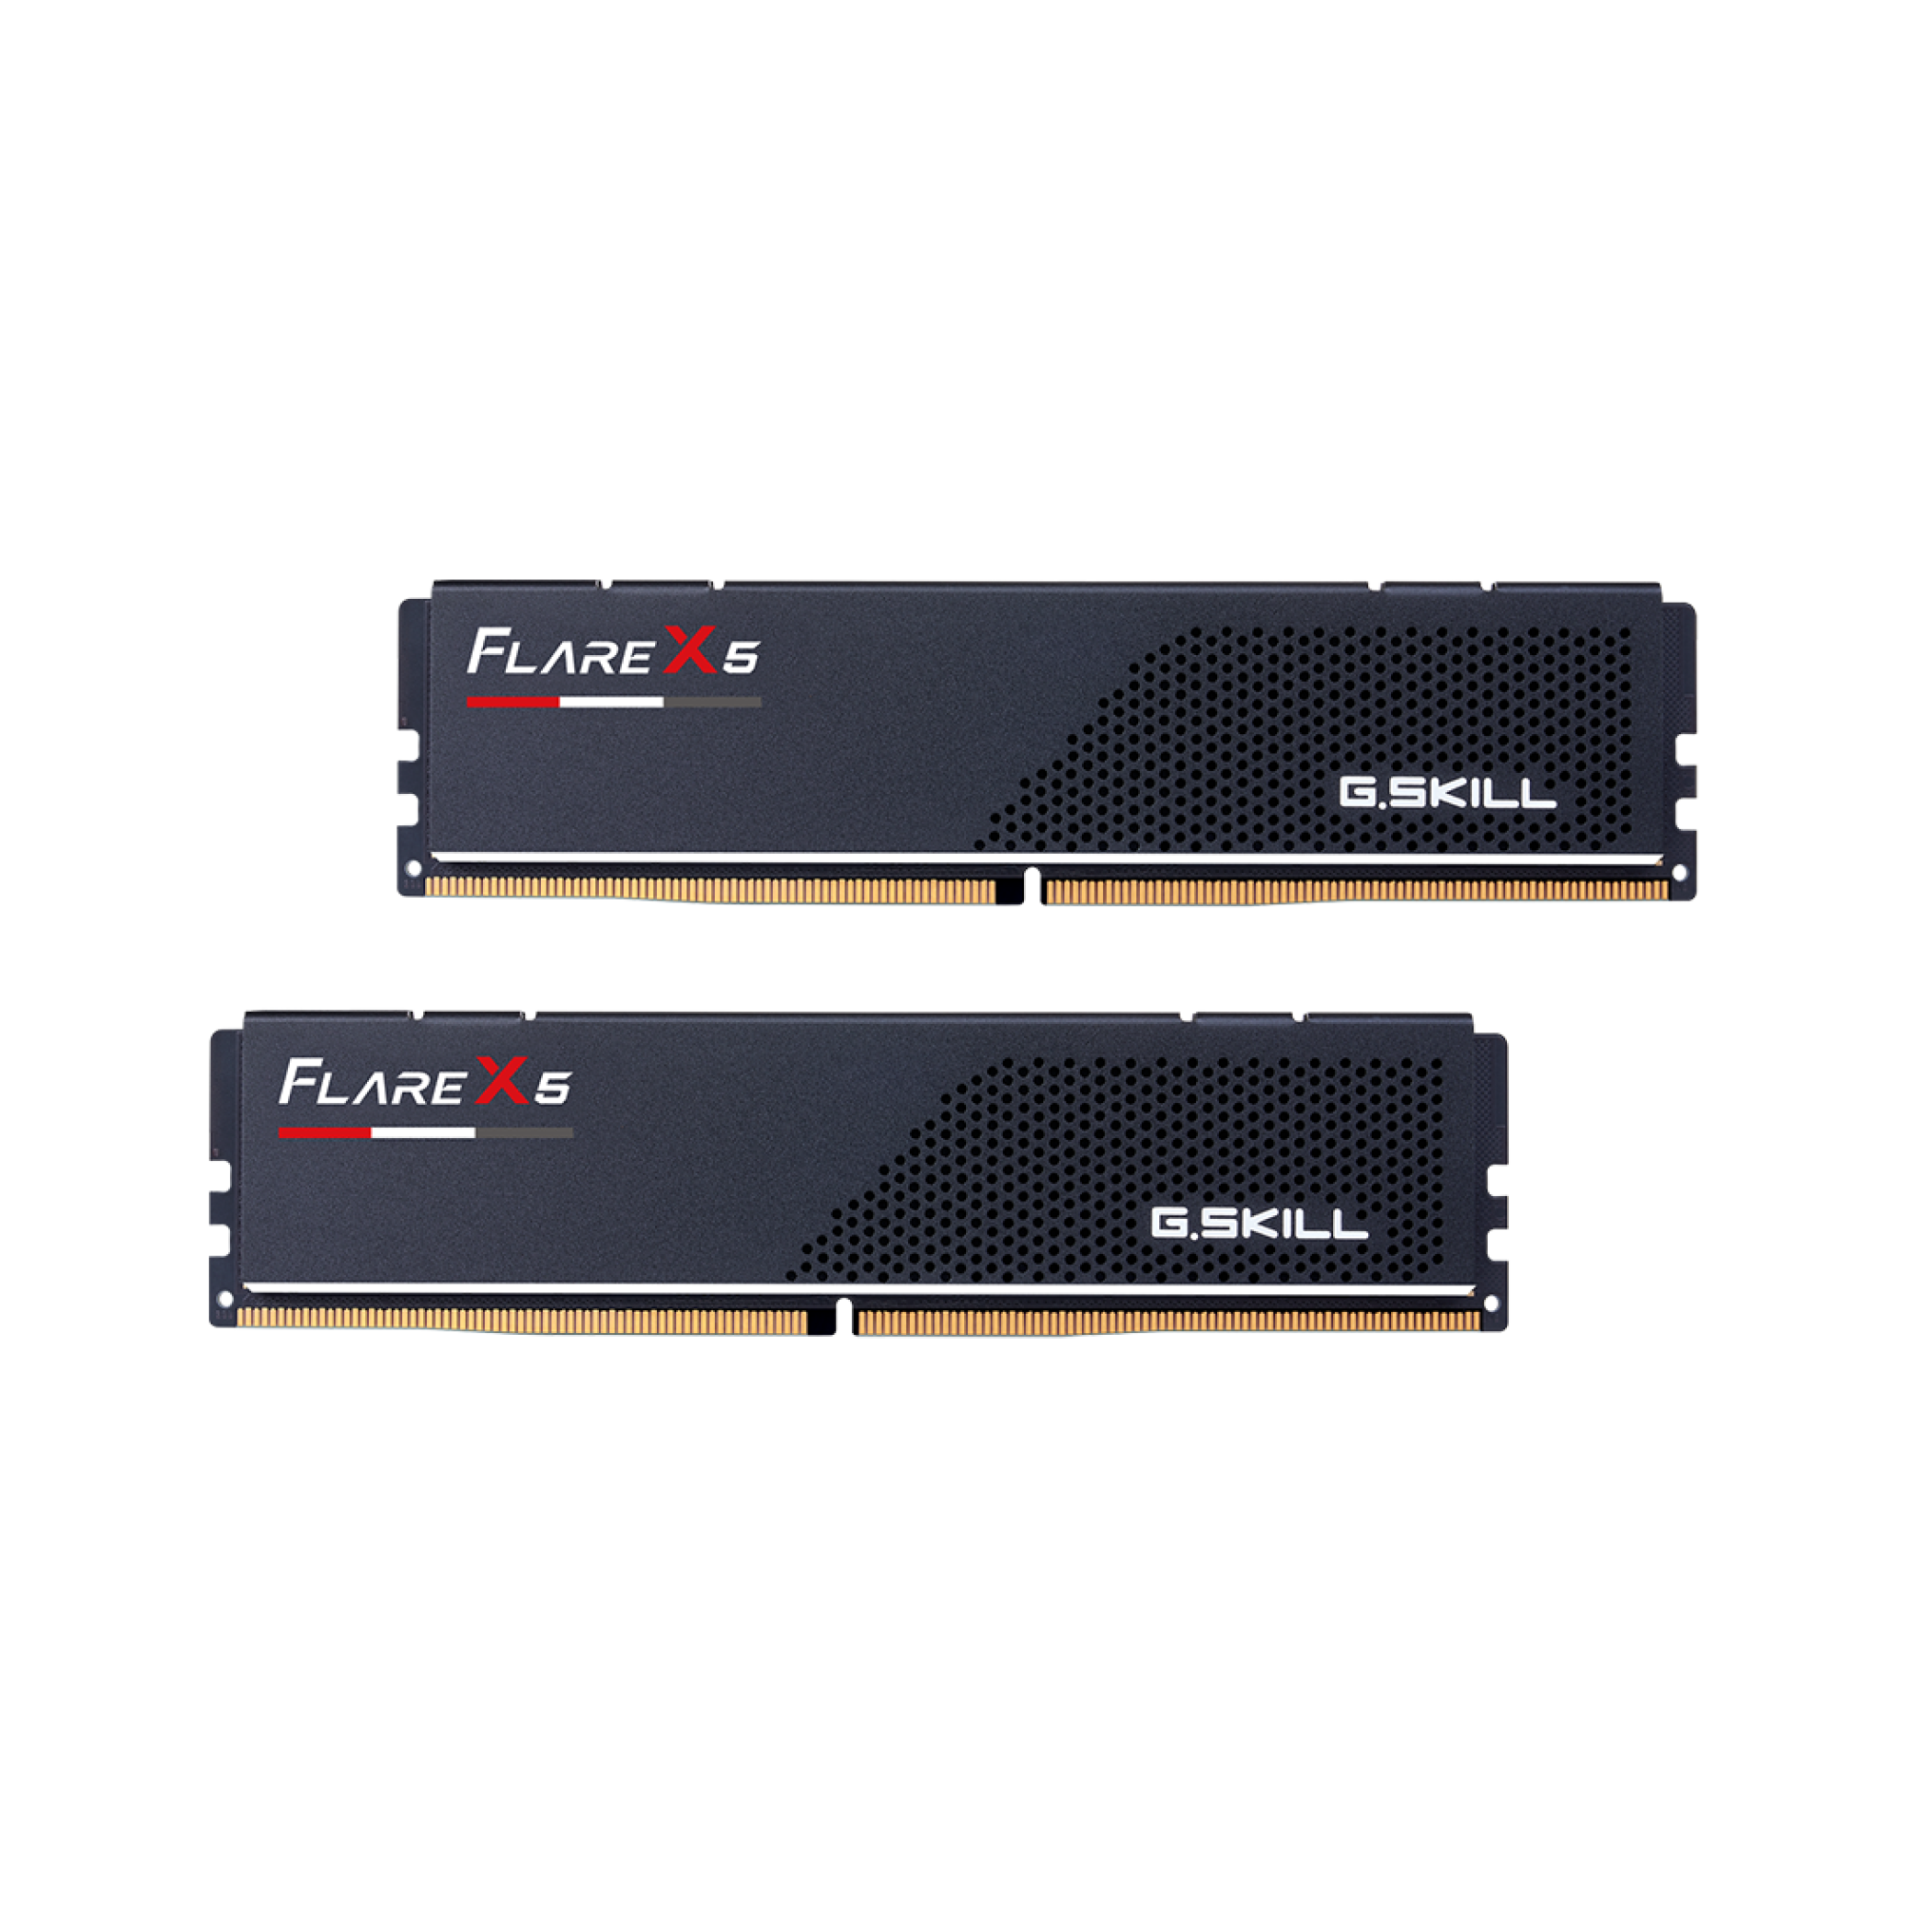 The G.Skill Flare X5 Series DDR5 memory.